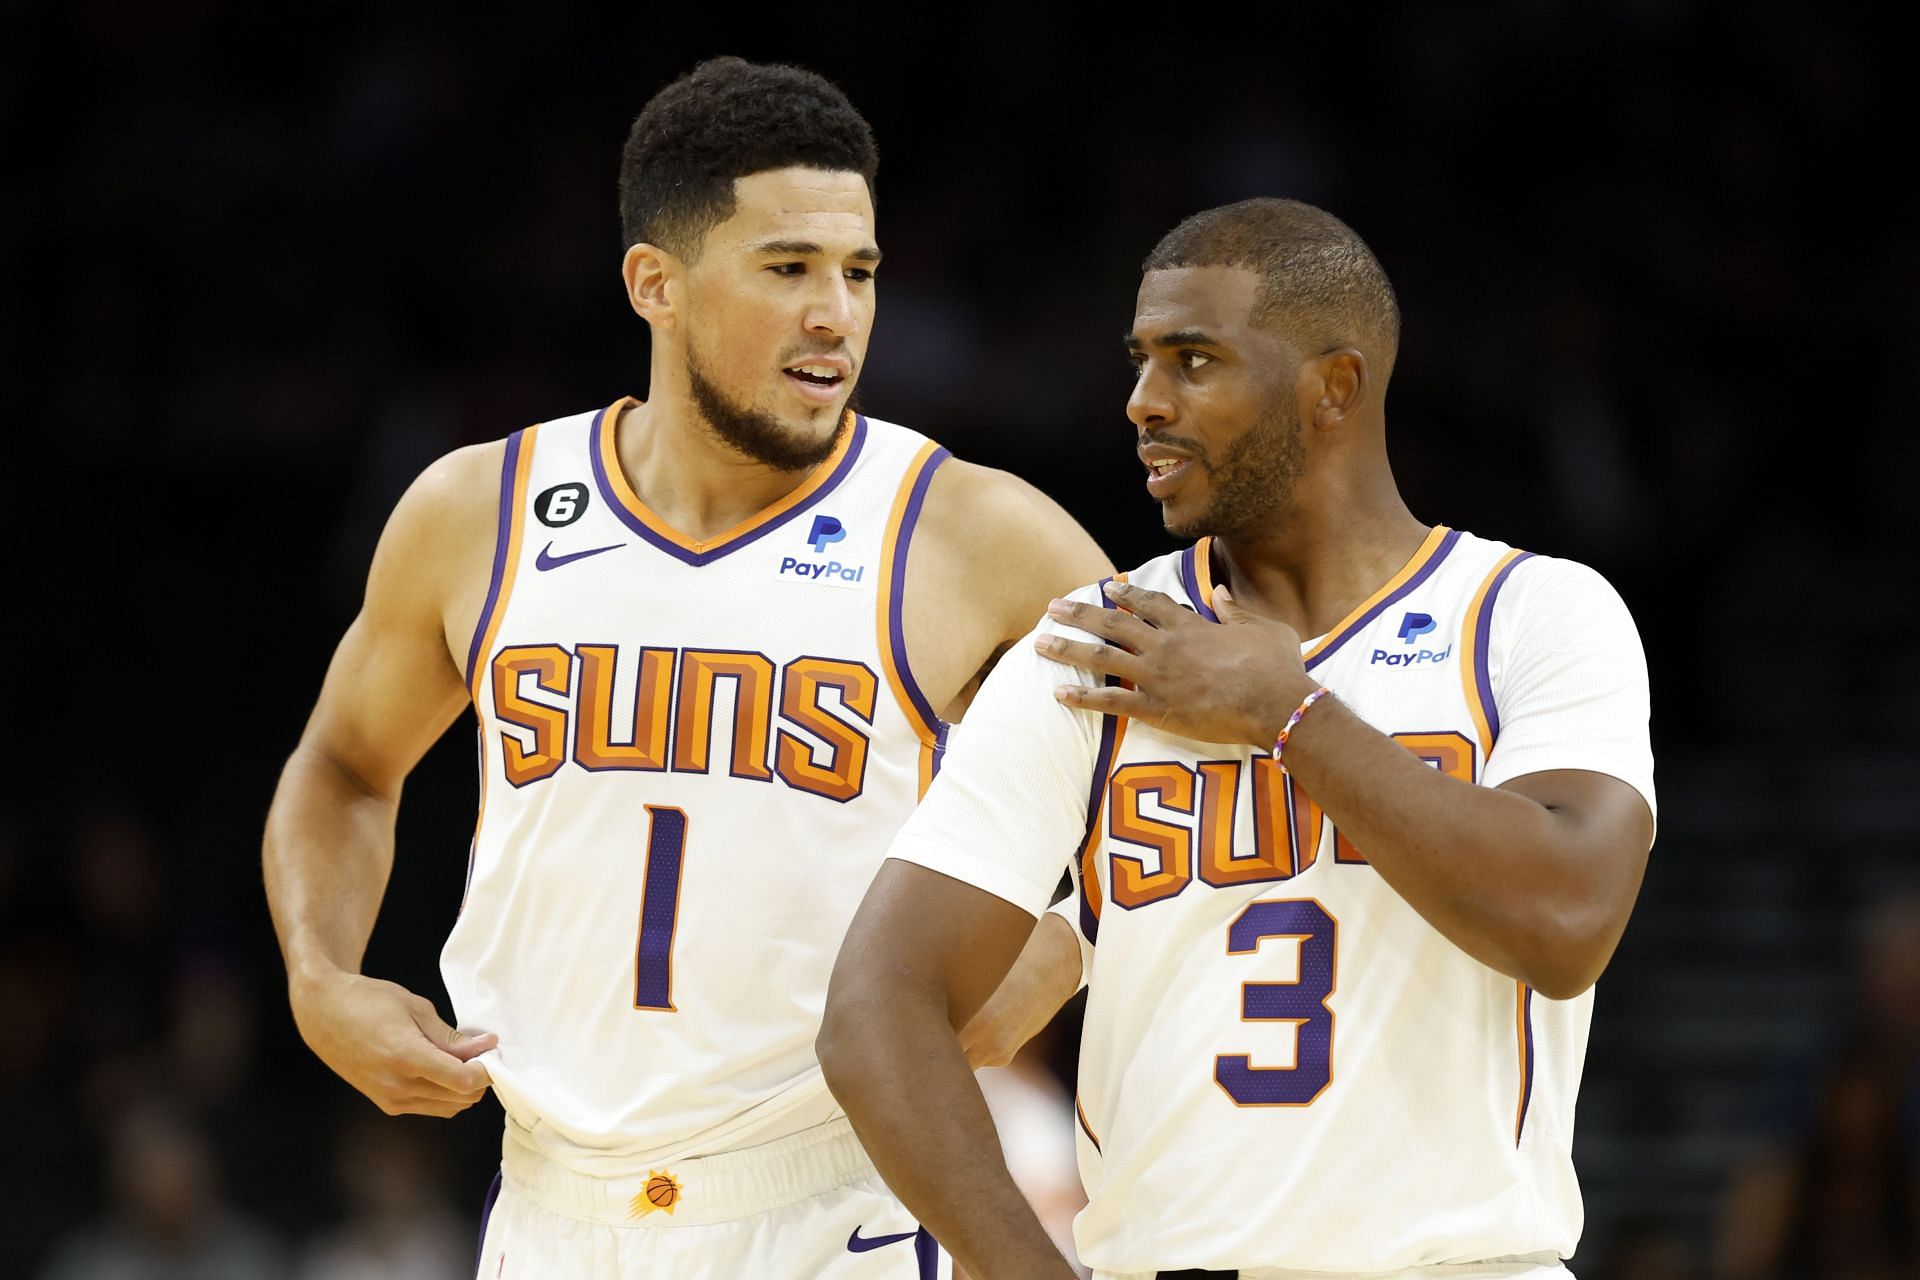 Devin Booker and Chris Paul (right) of the Phoenix Suns